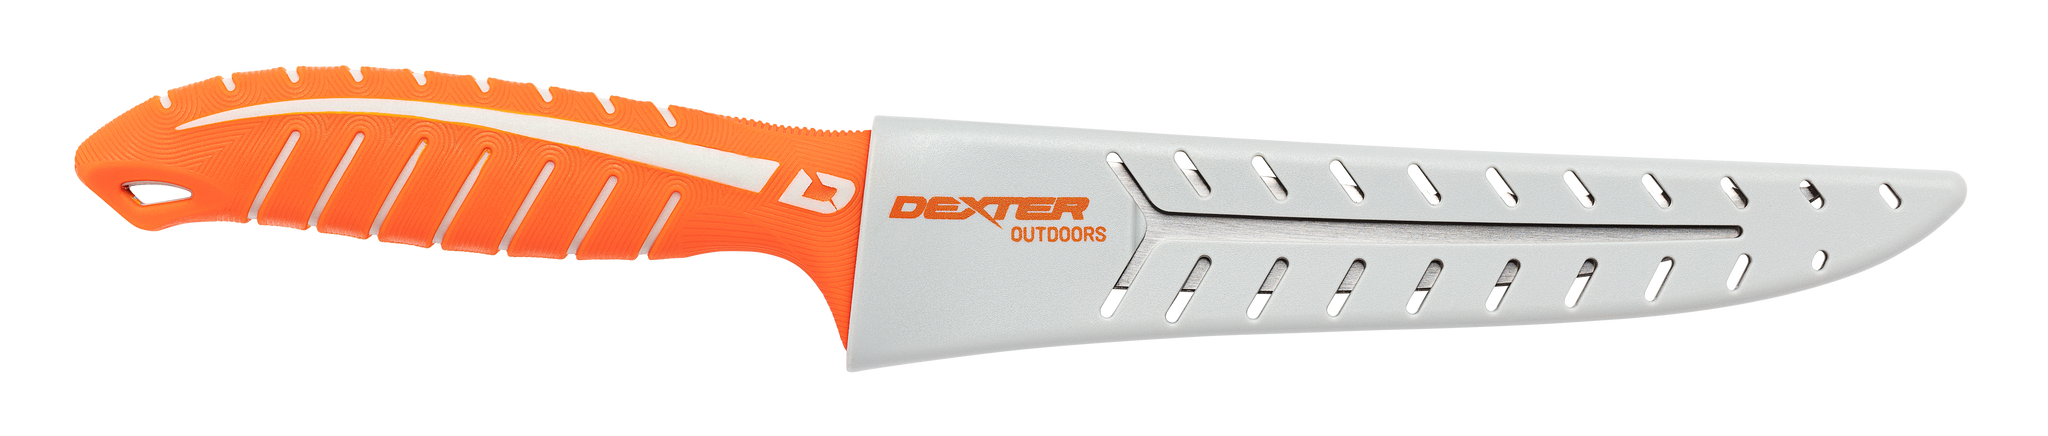 Dexter Outdoors DEXTREME Dual Edge 7" Flexible Fillet Knife with Sheath